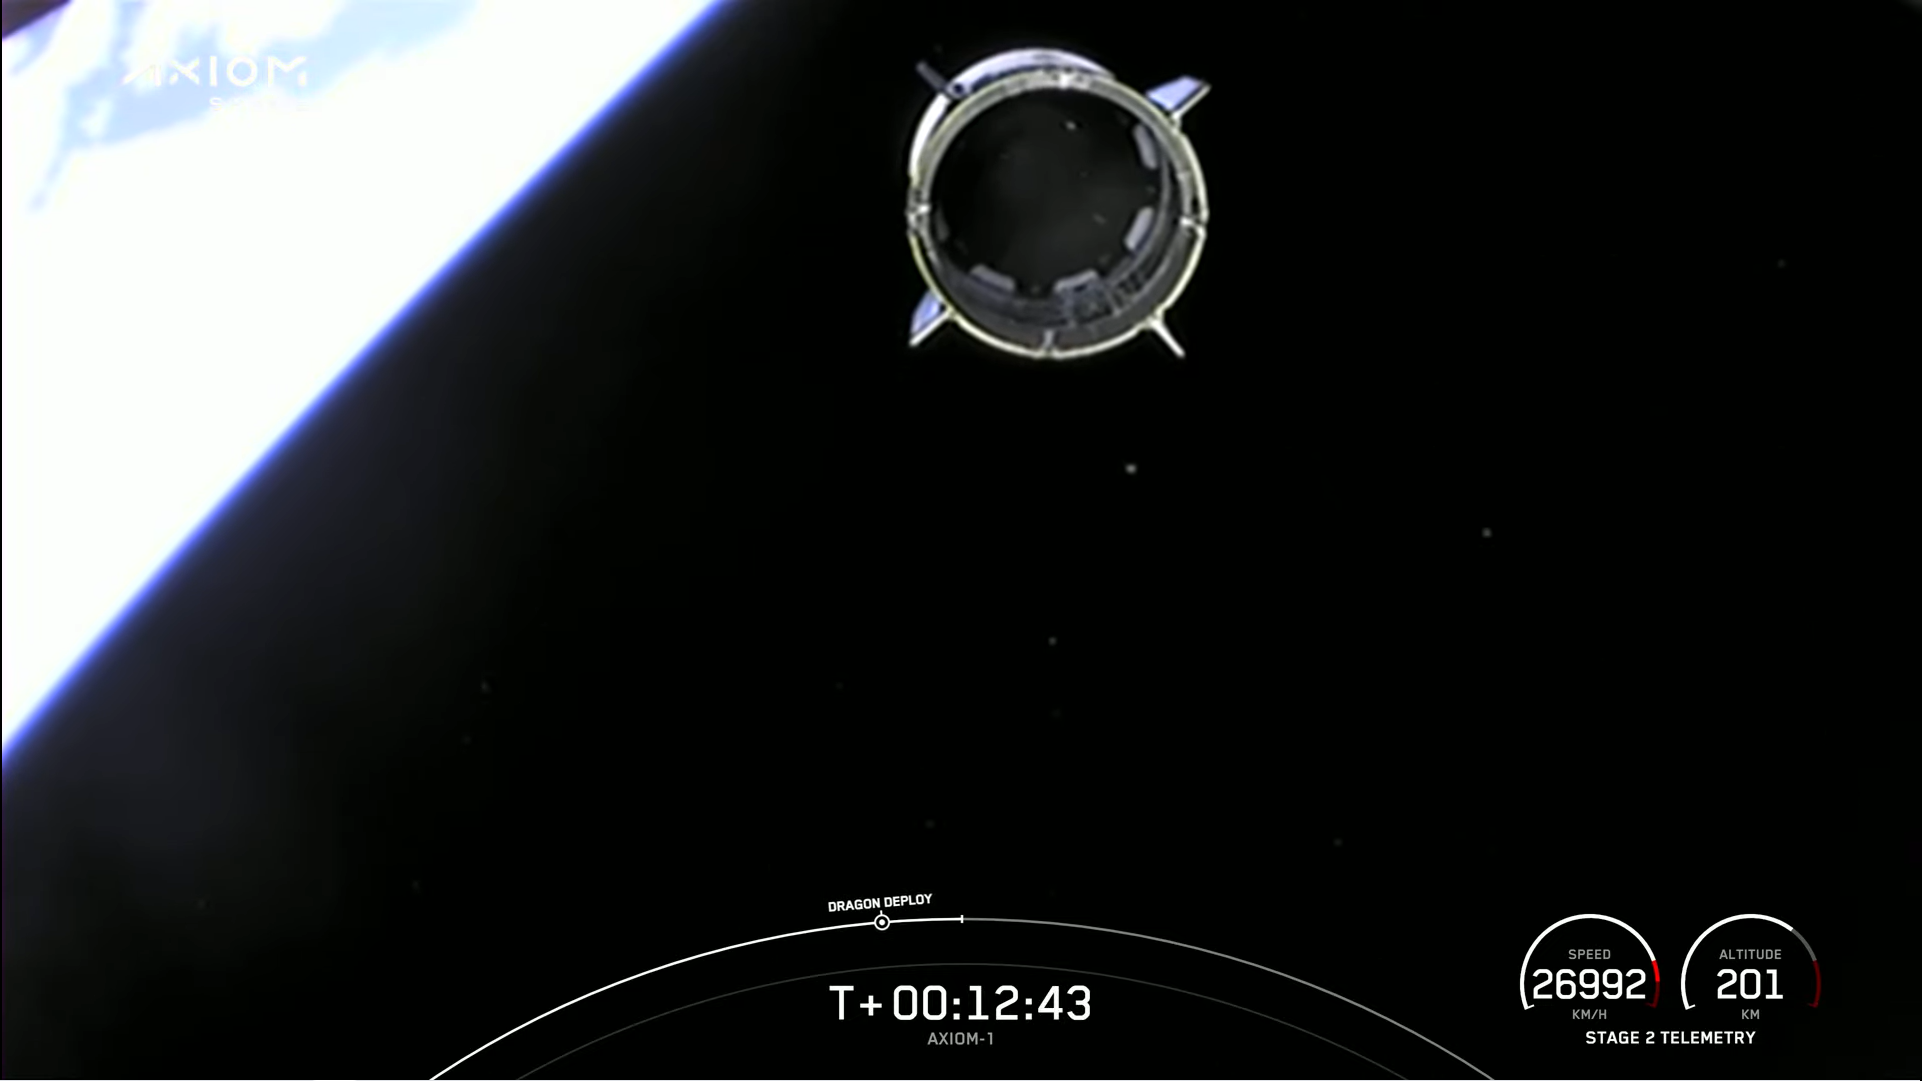 The second stage of the Falcon 9 rocket drifts away from the Dragon capsule.